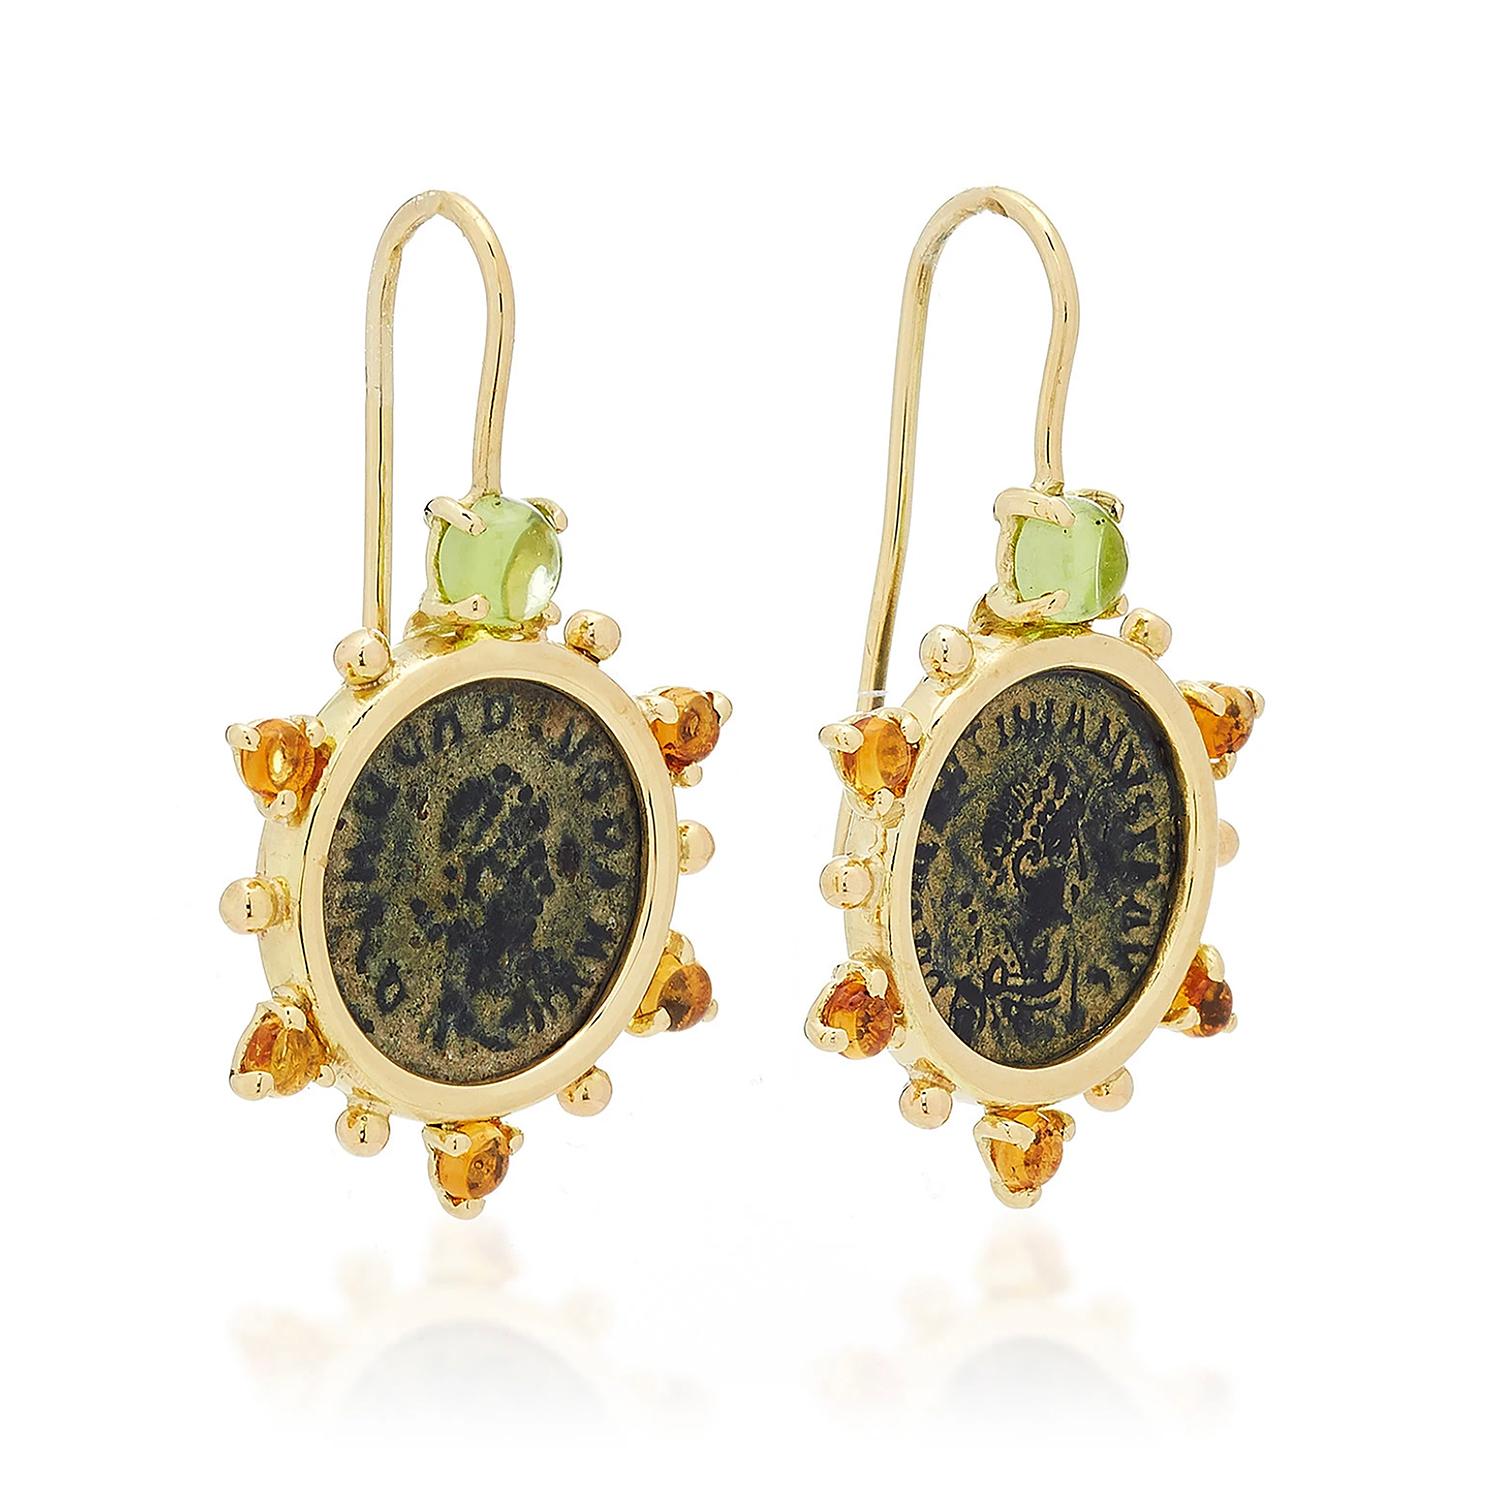 These Dubini coin earrings from the 'Empires' collection feature authentic Roman Imperial bronze coins set in 18K yellow gold with peridot and citrine cabochon stones.

* Due to the unique process of hand carving coins in ancient times, there may be